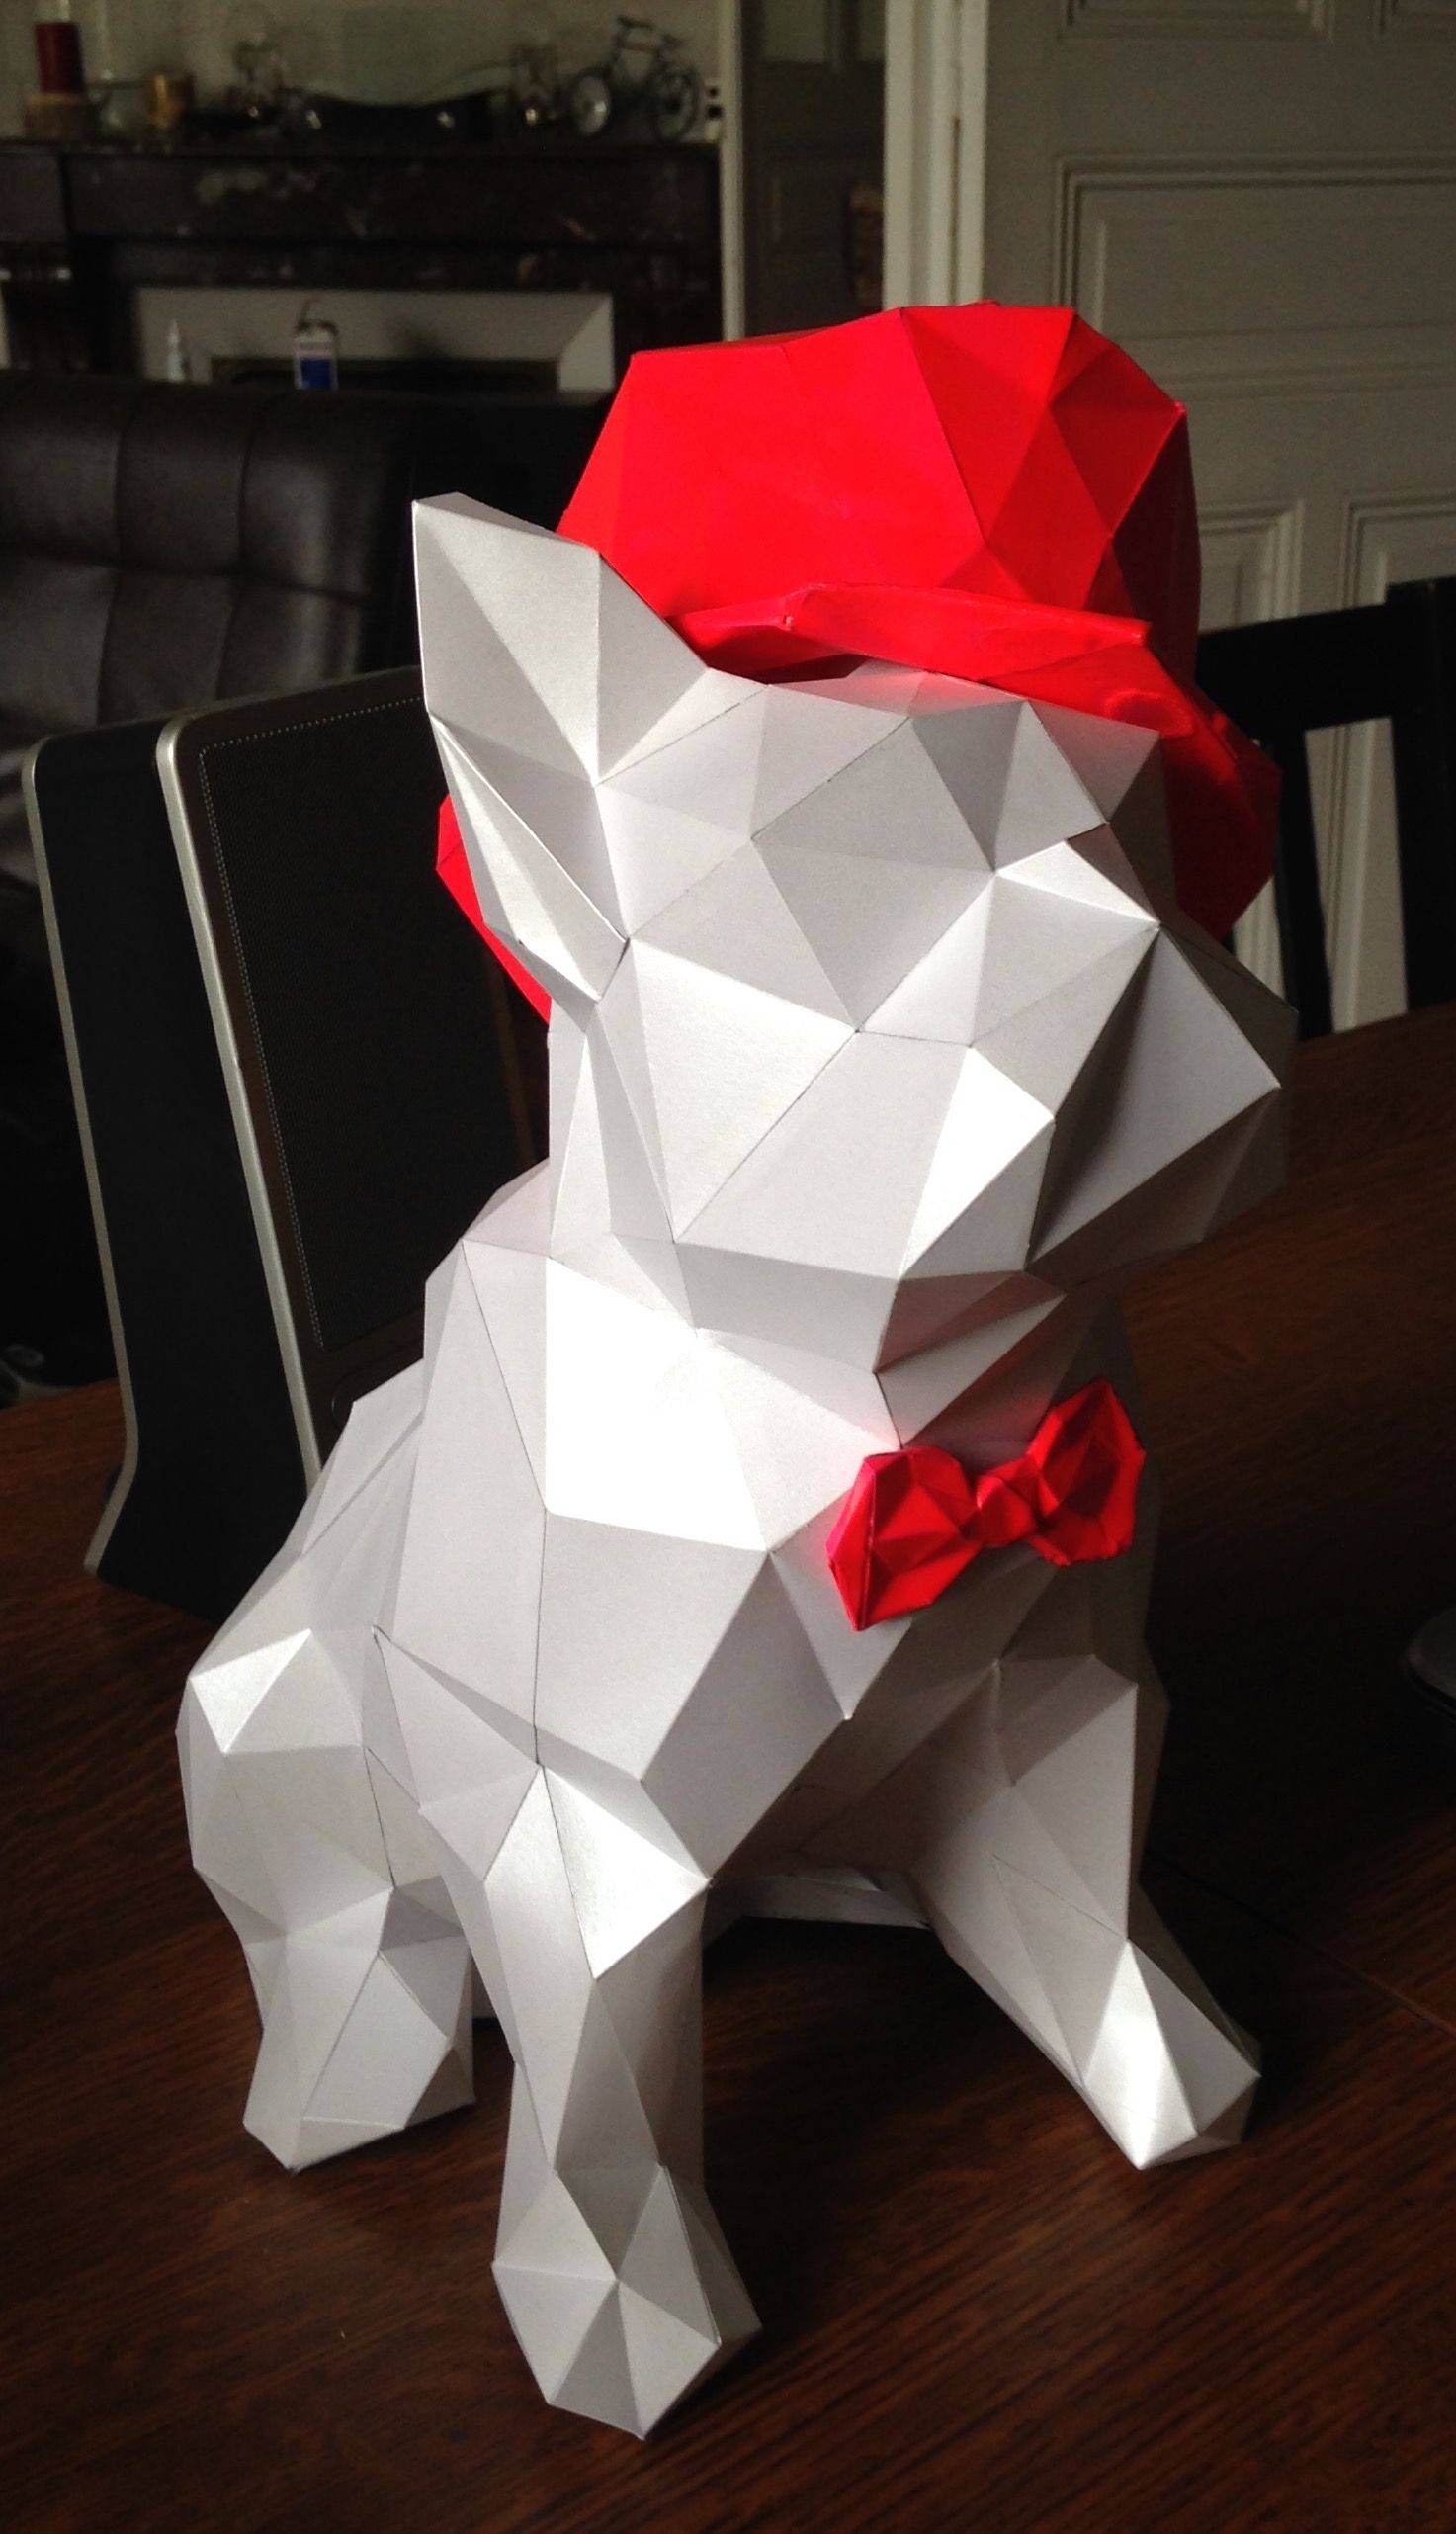 Dog Papercraft Dog Papercraft origami Hat and Bow Tie origami